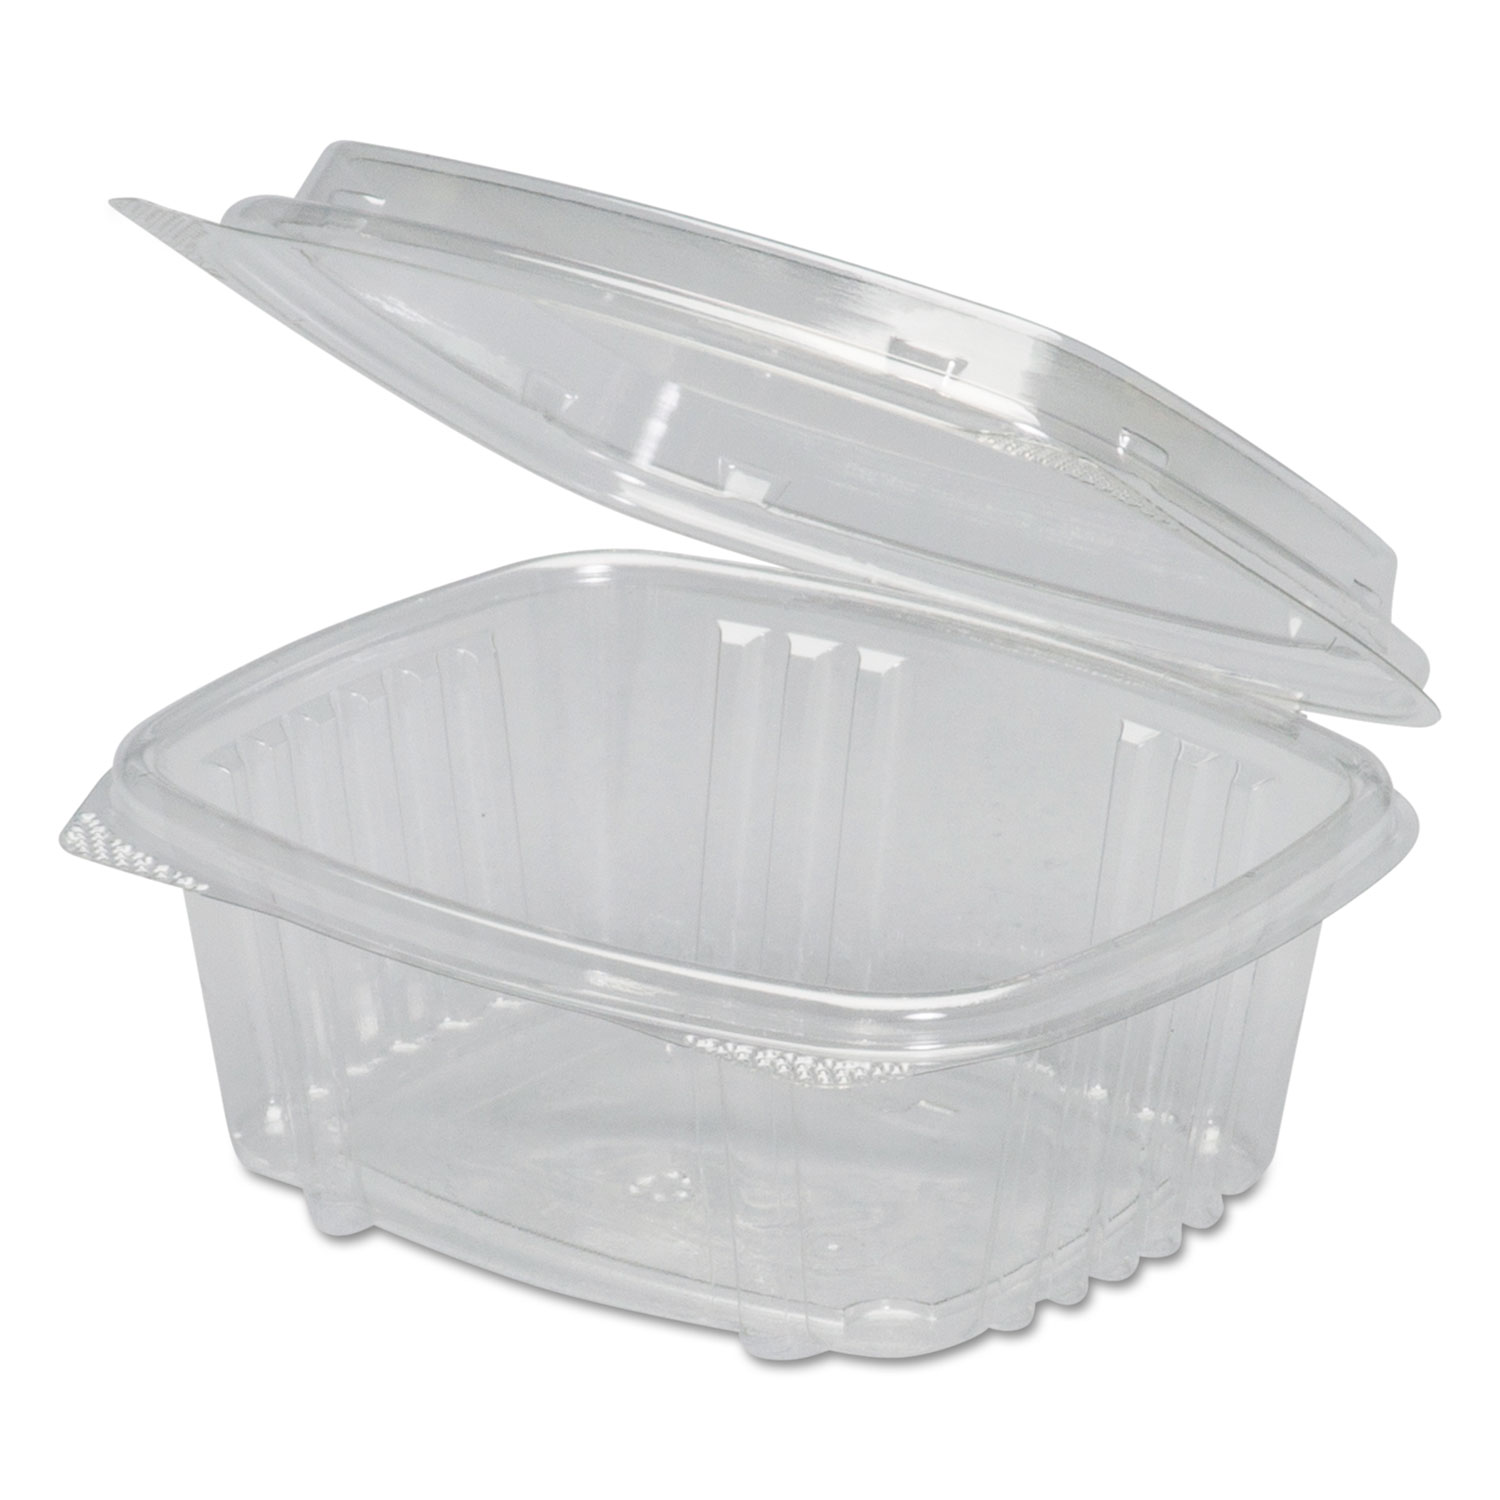 Clear Hinged Deli Container, APET, 12 oz, 5 3/8 x 4 1/2 x 2 7/8, 200/Carton